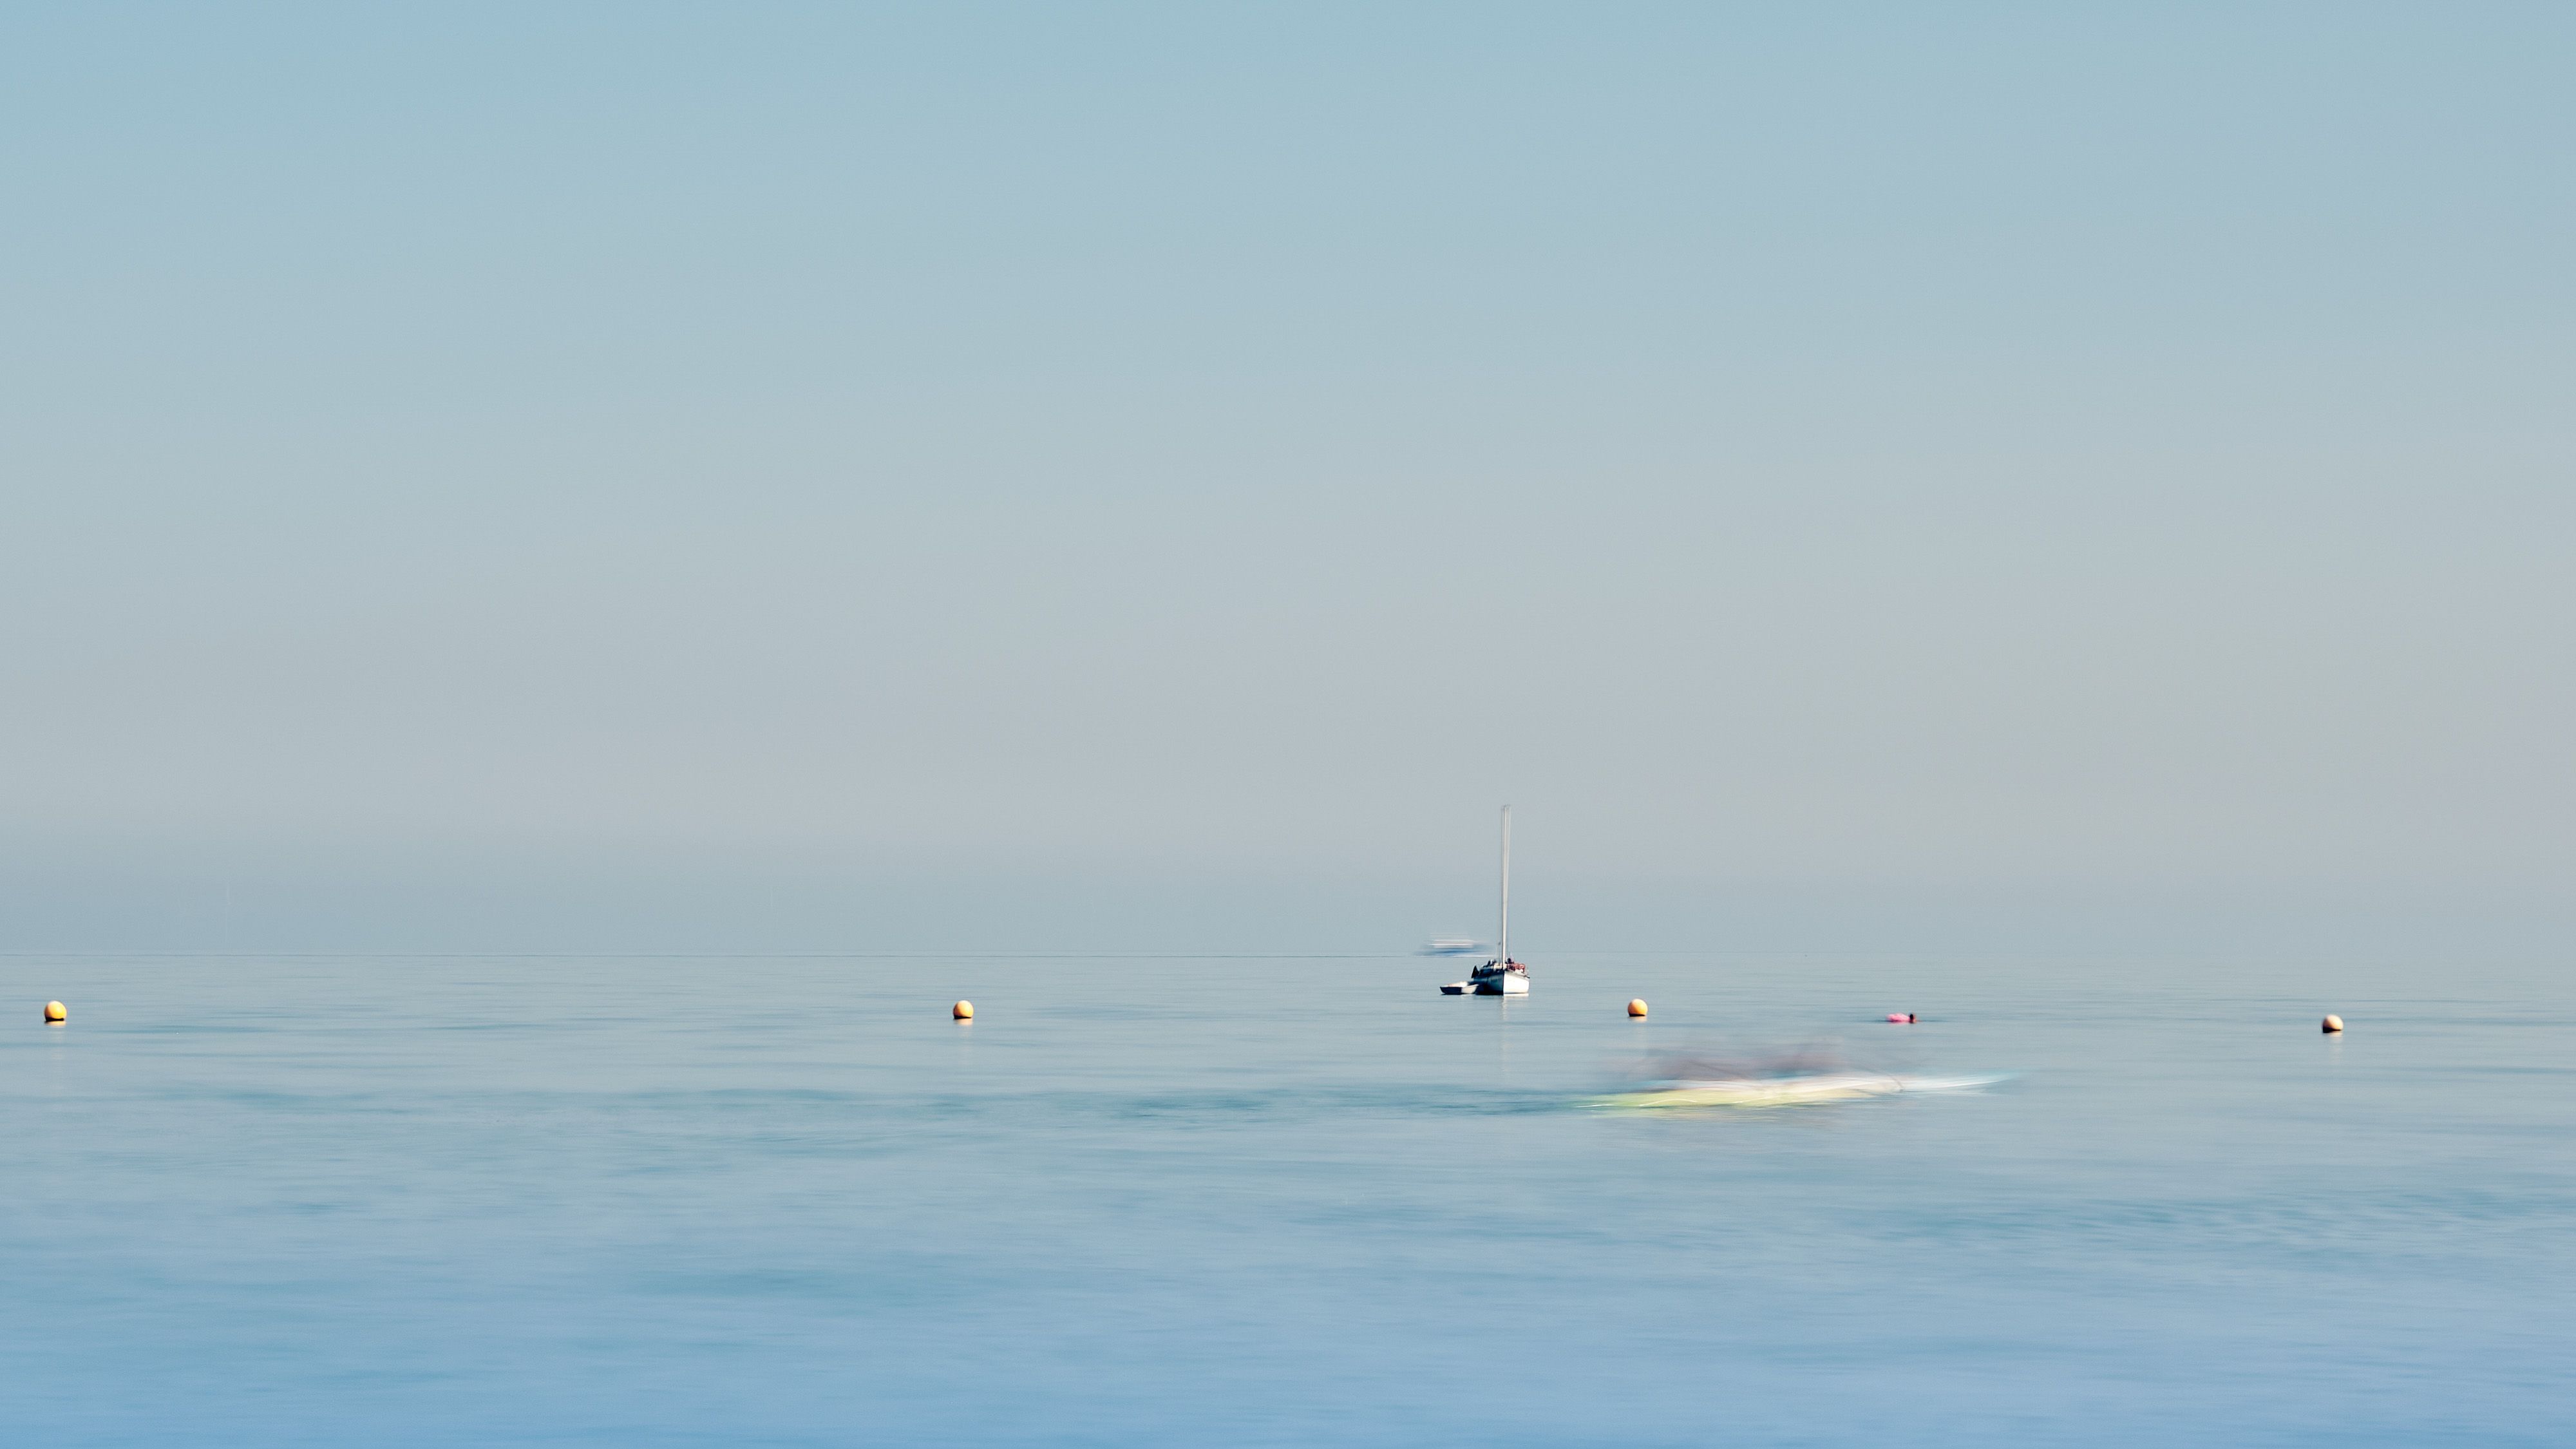 A speed boat flies past making the fishing boat look still